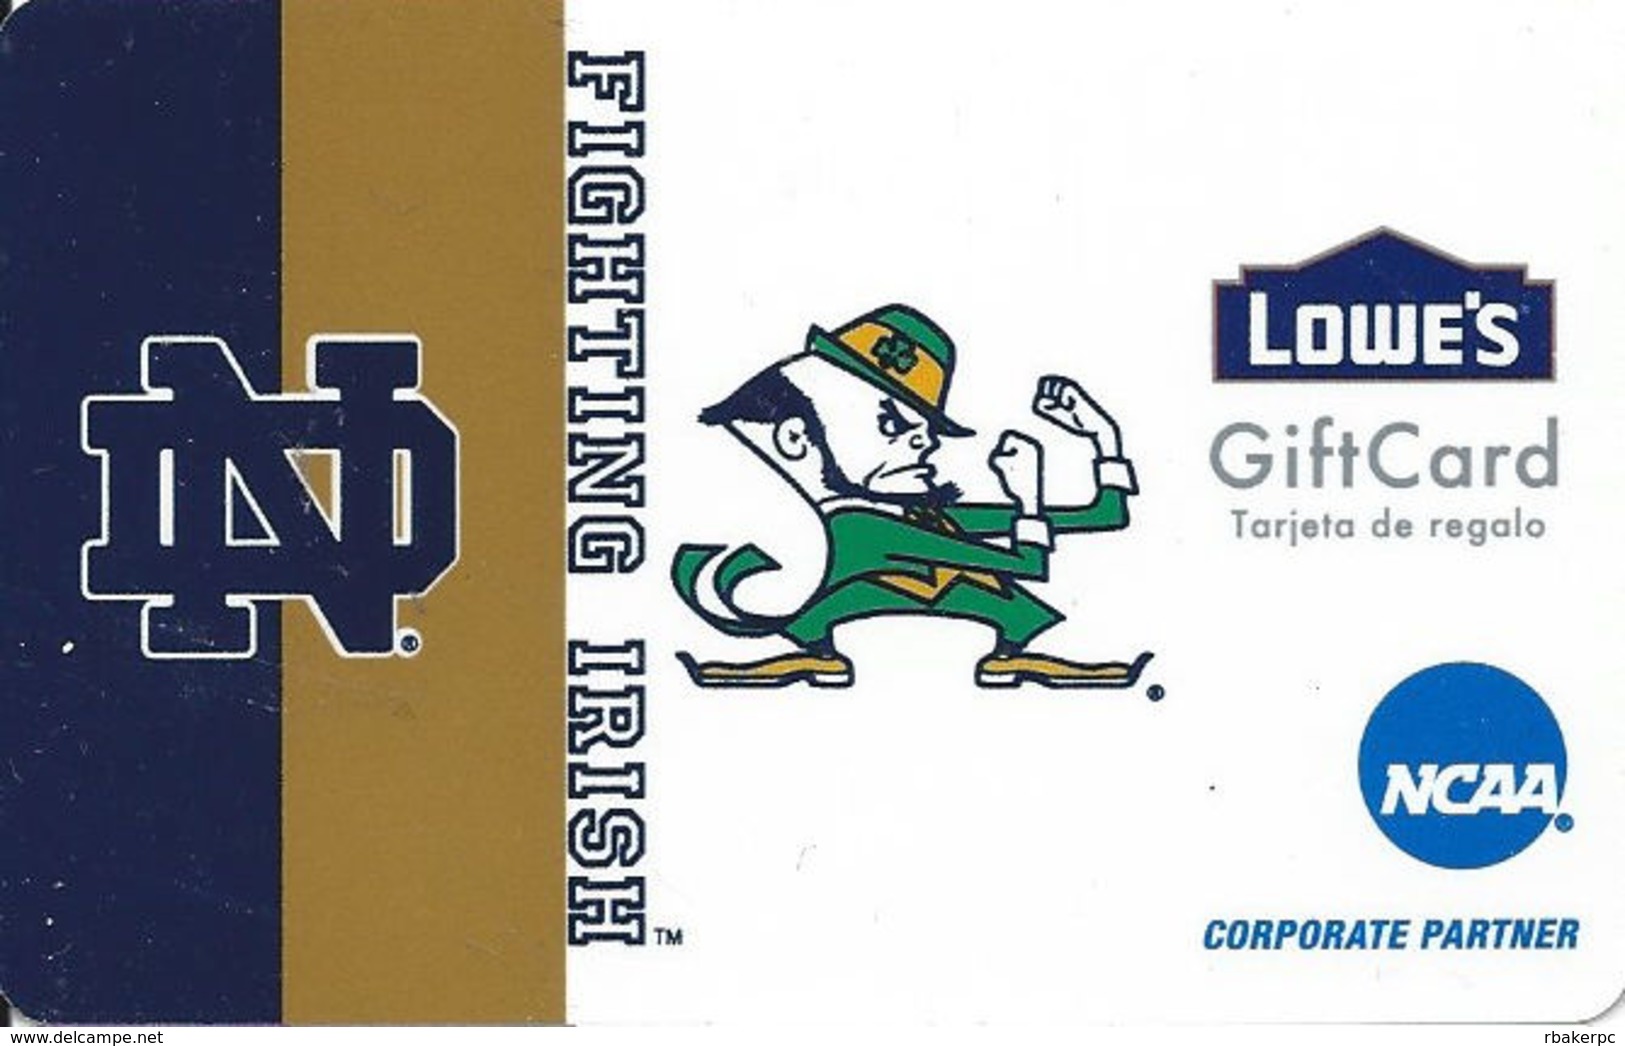 Lowes NCAA Gift Card - Notre Dame Fighting Irish - Gift Cards